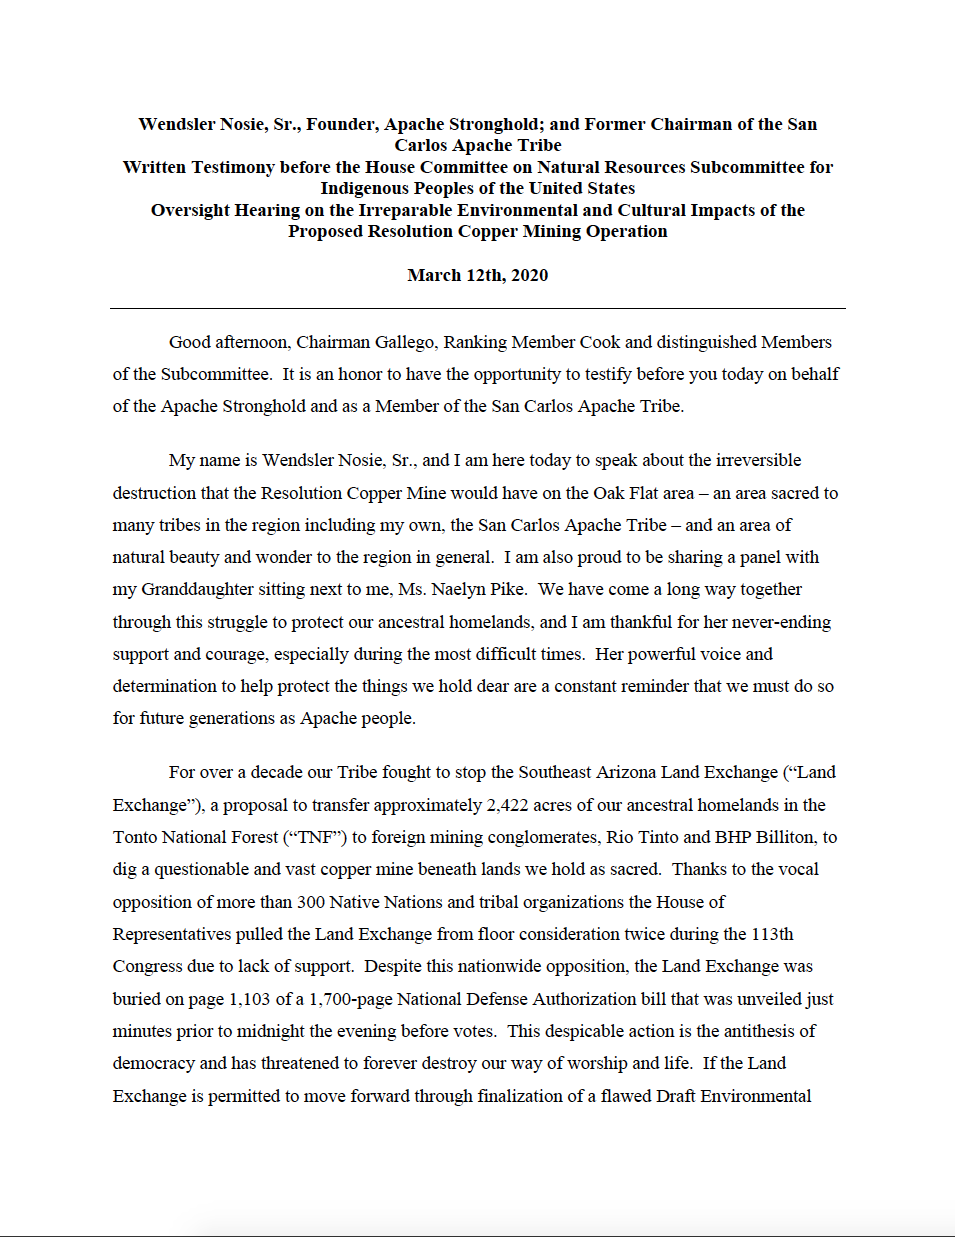 Thumbnail image of document cover: Written Testimony before the House Committee on Natural Resources, Subcommittee for Indigenous Peoples of the United States, Oversight Hearing on the Irreparable Environmental and Cultural Impacts of the Proposed Resolution Copper Mining Operation